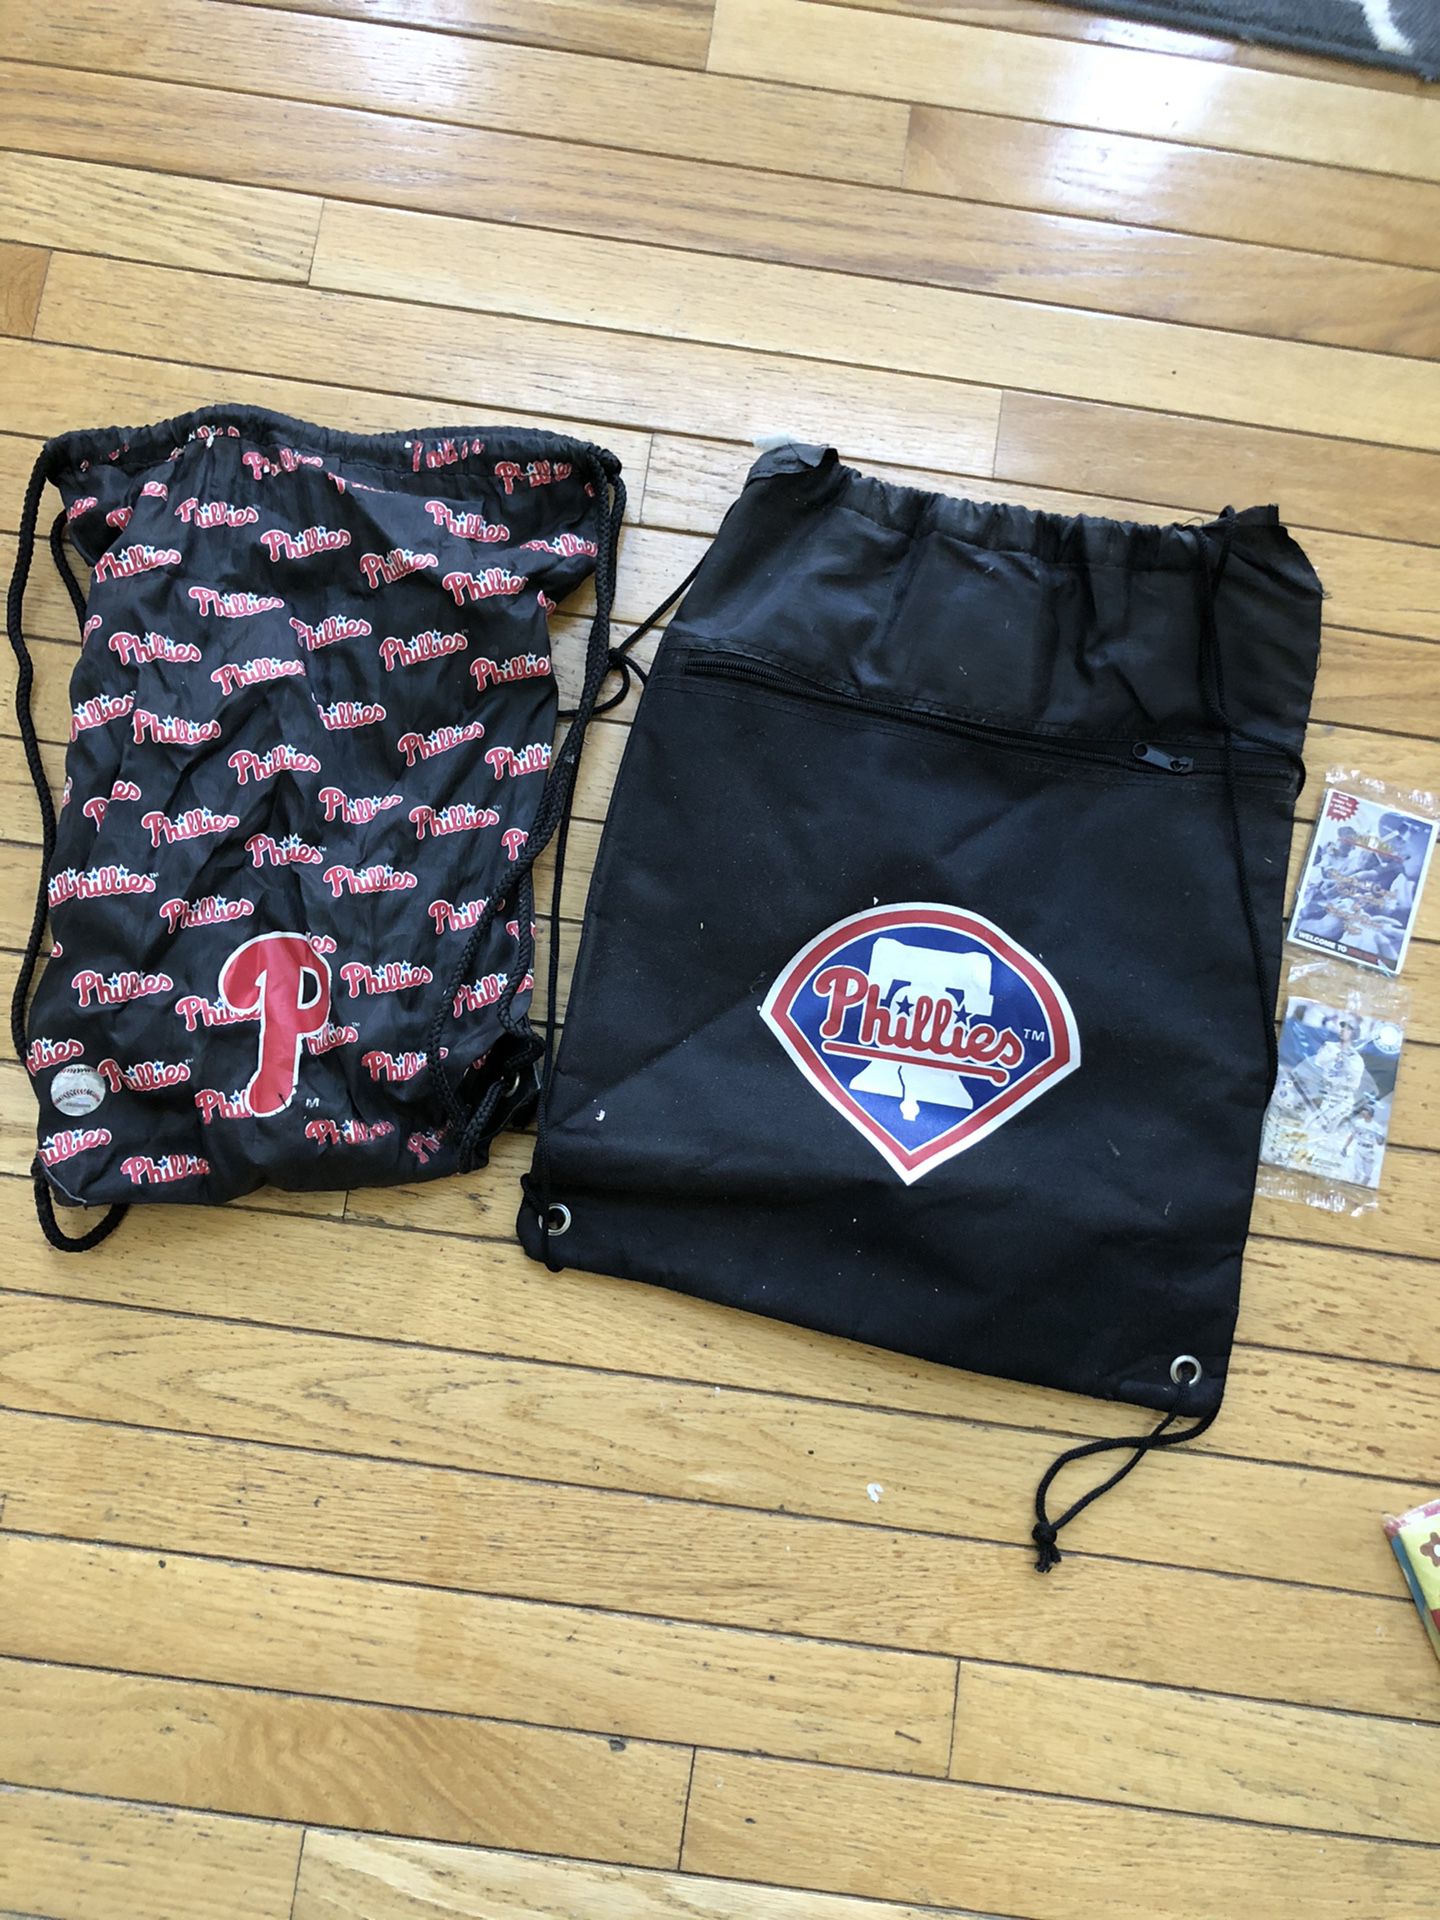 Two Phillies backpacks and baseball cards